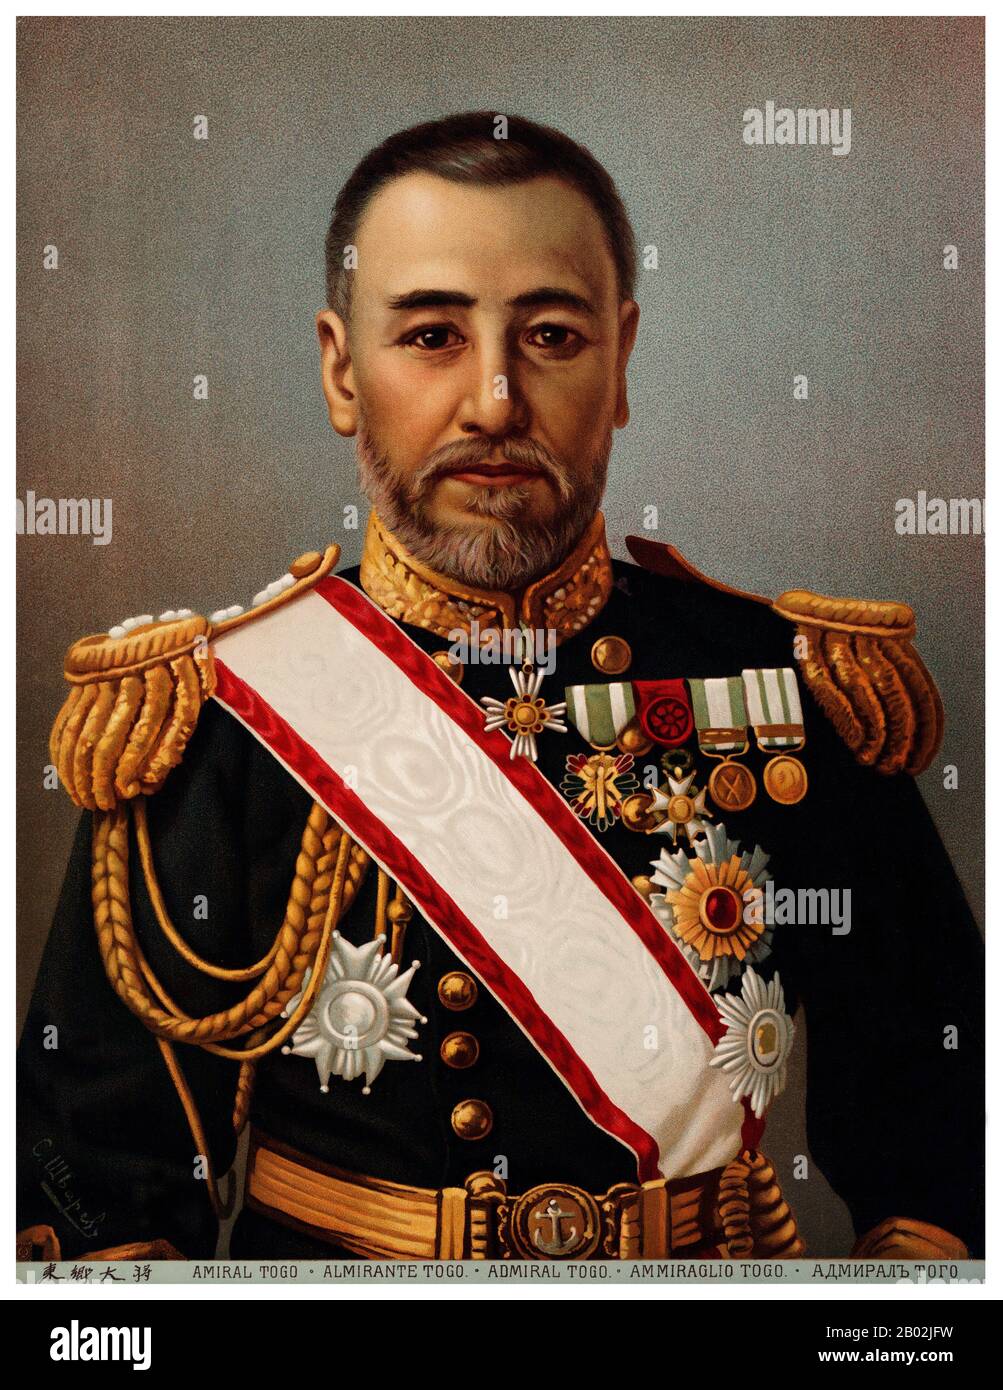 During the Russo-Japanese War, Tōgō engaged the Russian navy at Port Arthur and the Yellow Sea in 1904, and destroyed the Russian Baltic Fleet at the Battle of Tsushima in 1905, a battle which shocked the world.  Tsushima had broken the Russian strength in East Asia, and is said to have triggered various uprisings in the Russian Navy (1905 uprisings in Vladivostok and the Battleship Potemkin uprising), contributing to the Russian Revolution of 1905.  Togo was termed by Western journalists  'The Nelson of the East', after the British admiral who defeated the French and Spanish at Trafalgar. Stock Photo